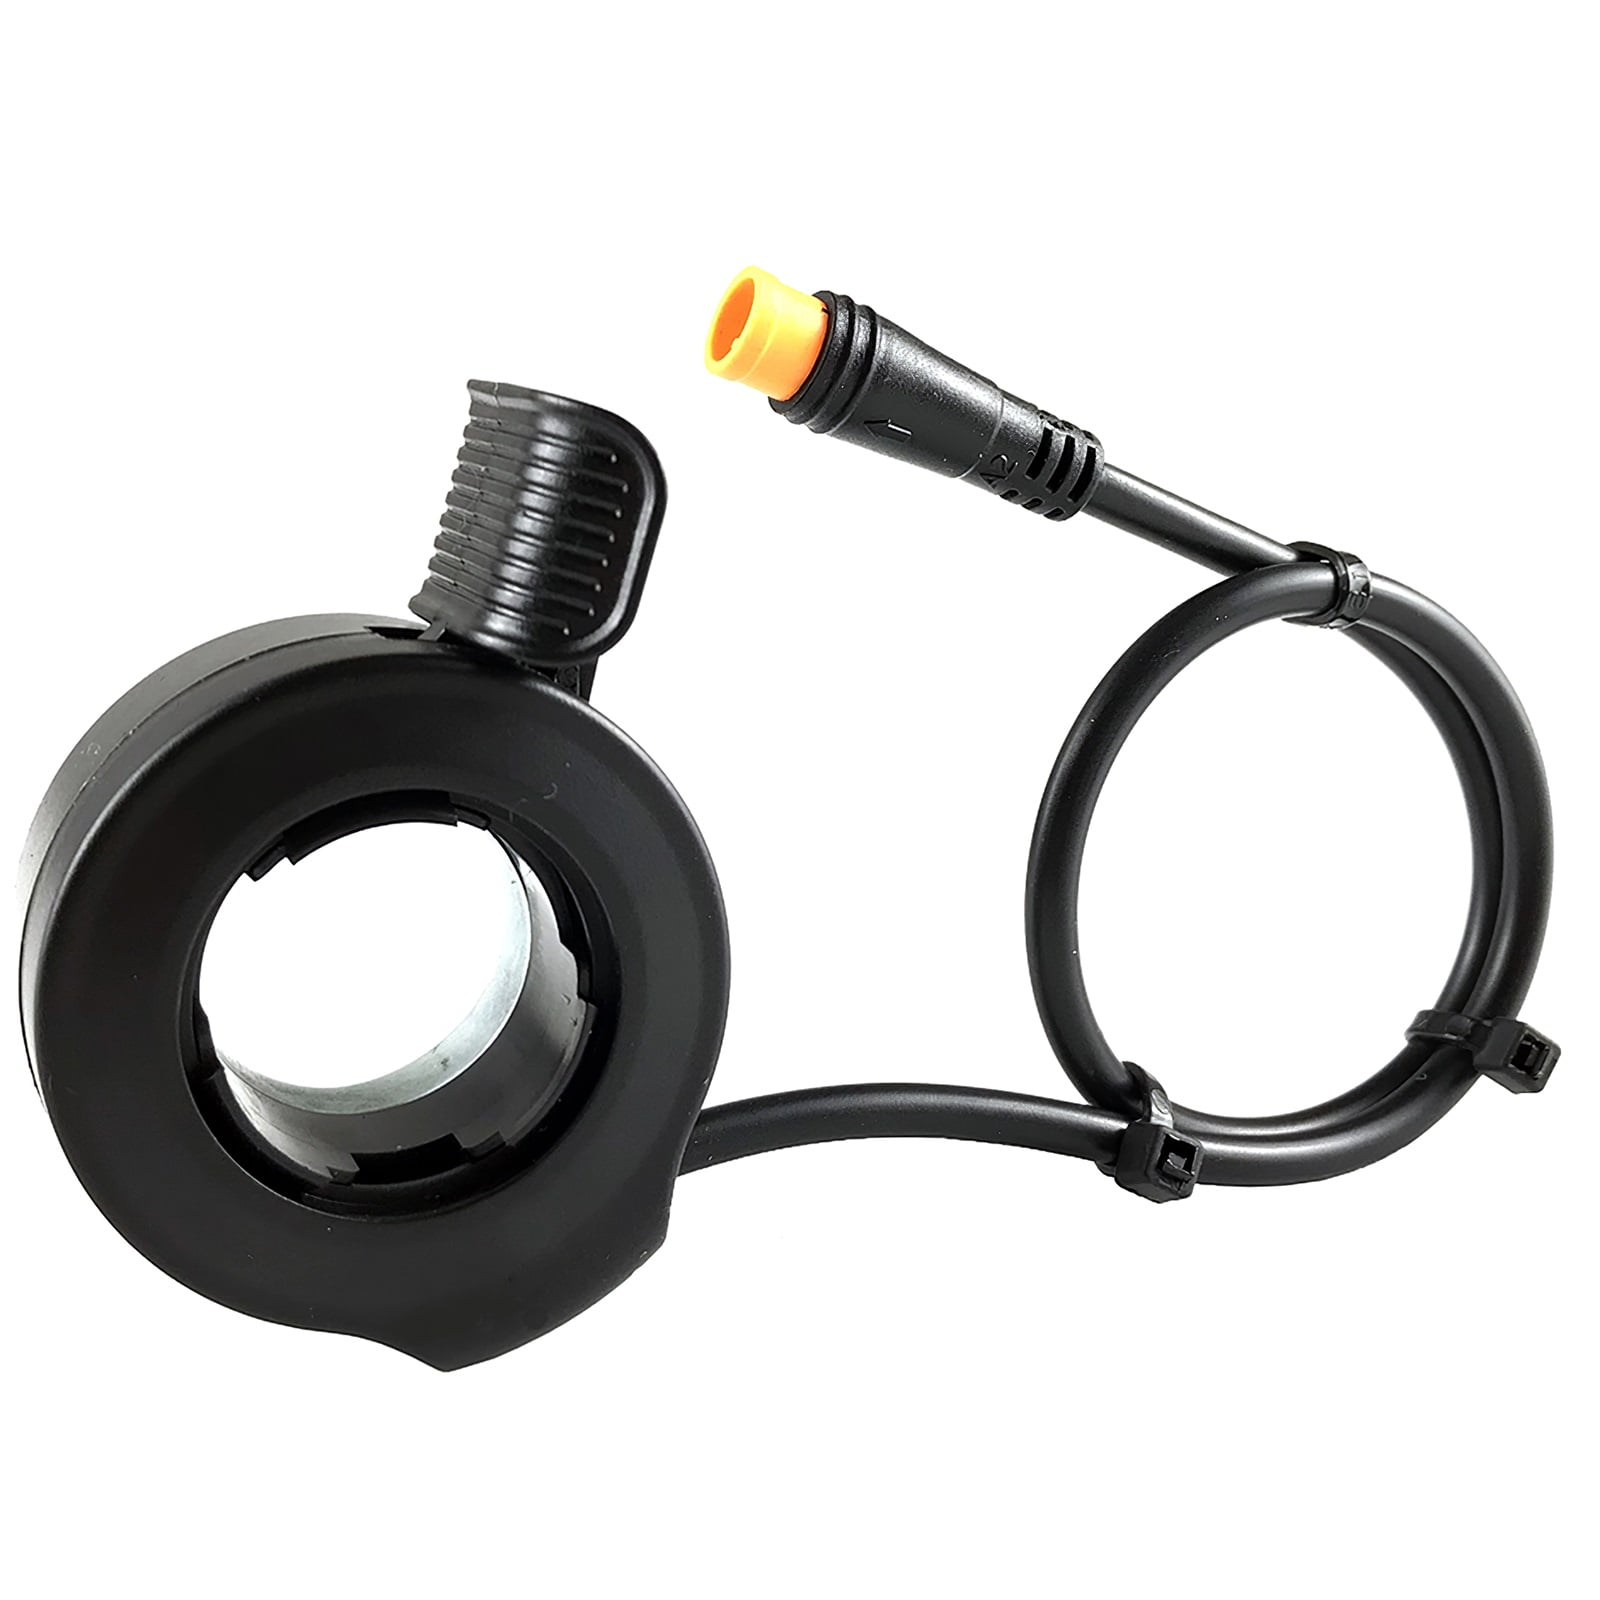 Electric Bike Thumb Throttle Can be Used on Left or Right Hand 130X Throttle 24V 36V 48V 60V 72V Waterproof/SM Connector for E Bikes or Folding Electric Scooter 